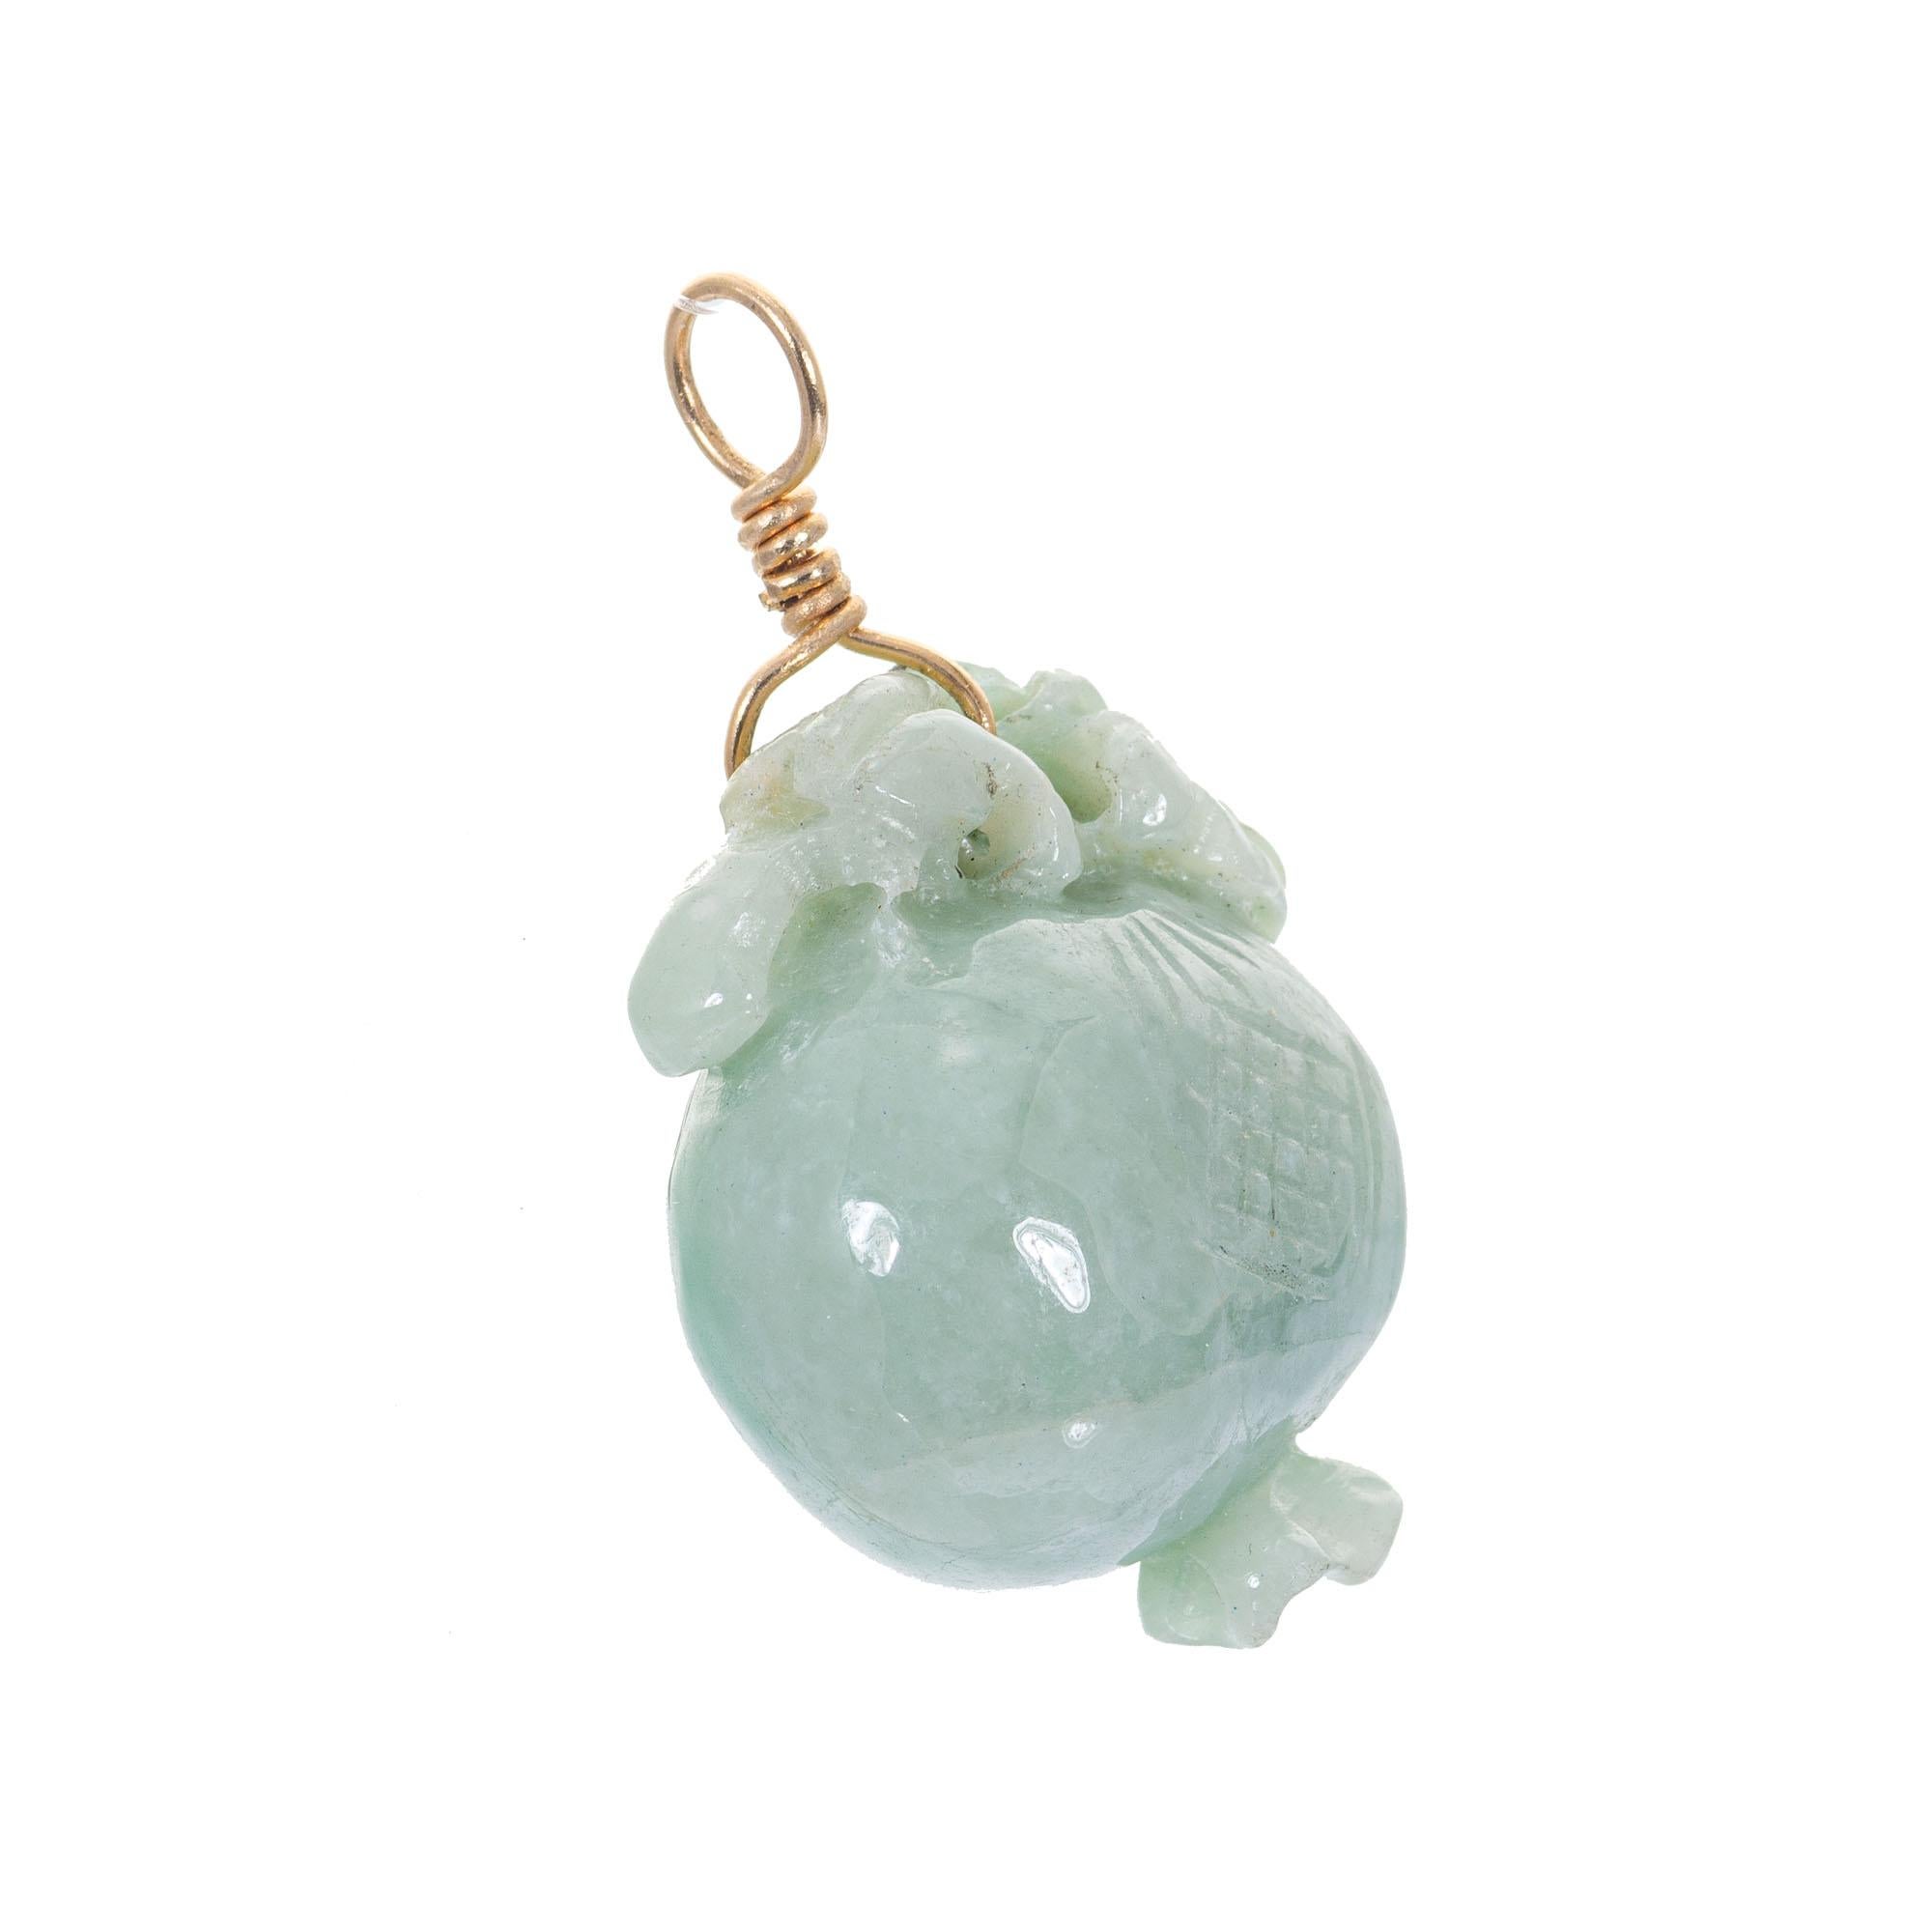 Natural GIA certified Jadeite Jade natural color pendant with hand wrapped 14k yellow gold wire top.

1 pierced carved green natural Jadeite Jade, 23.48 x 19.11 x 14.83mm, GIA certificate #2183037947
14k yellow gold
9.8 grams
Tested: 14k
Top to